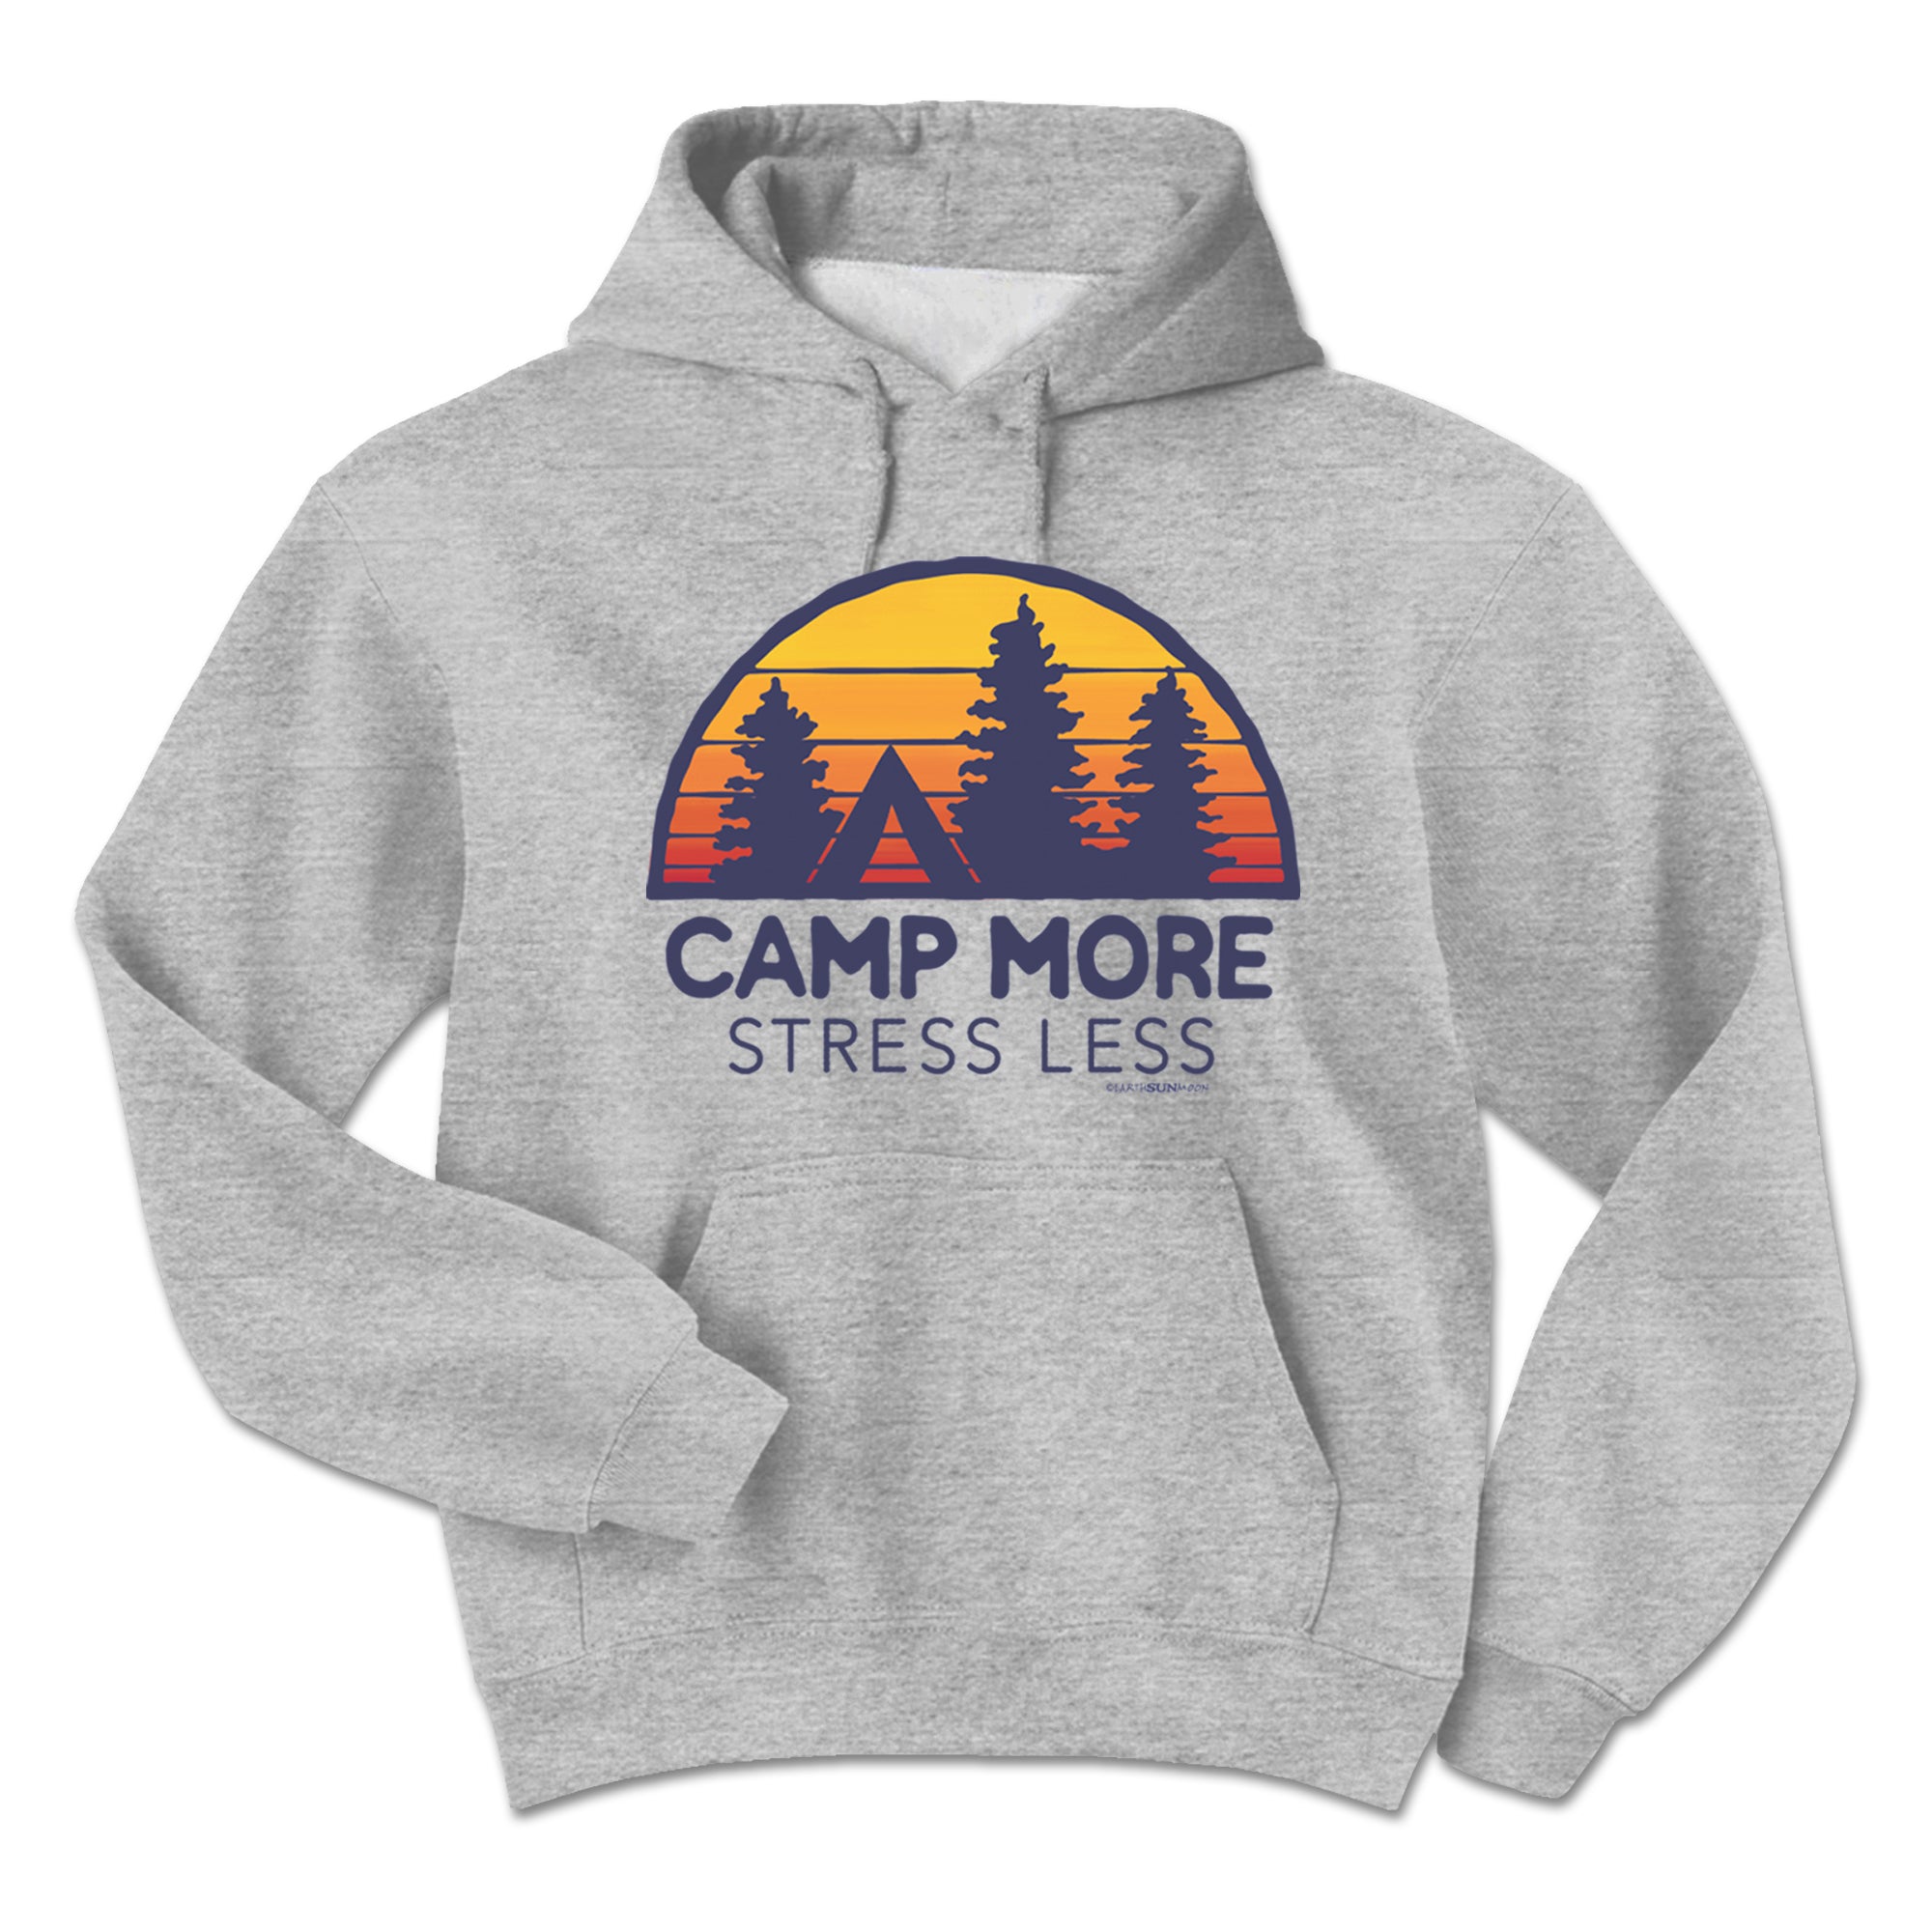 Earth Sun Moon Camp More Stress Less Adult Hoodie - Sports Grey - M